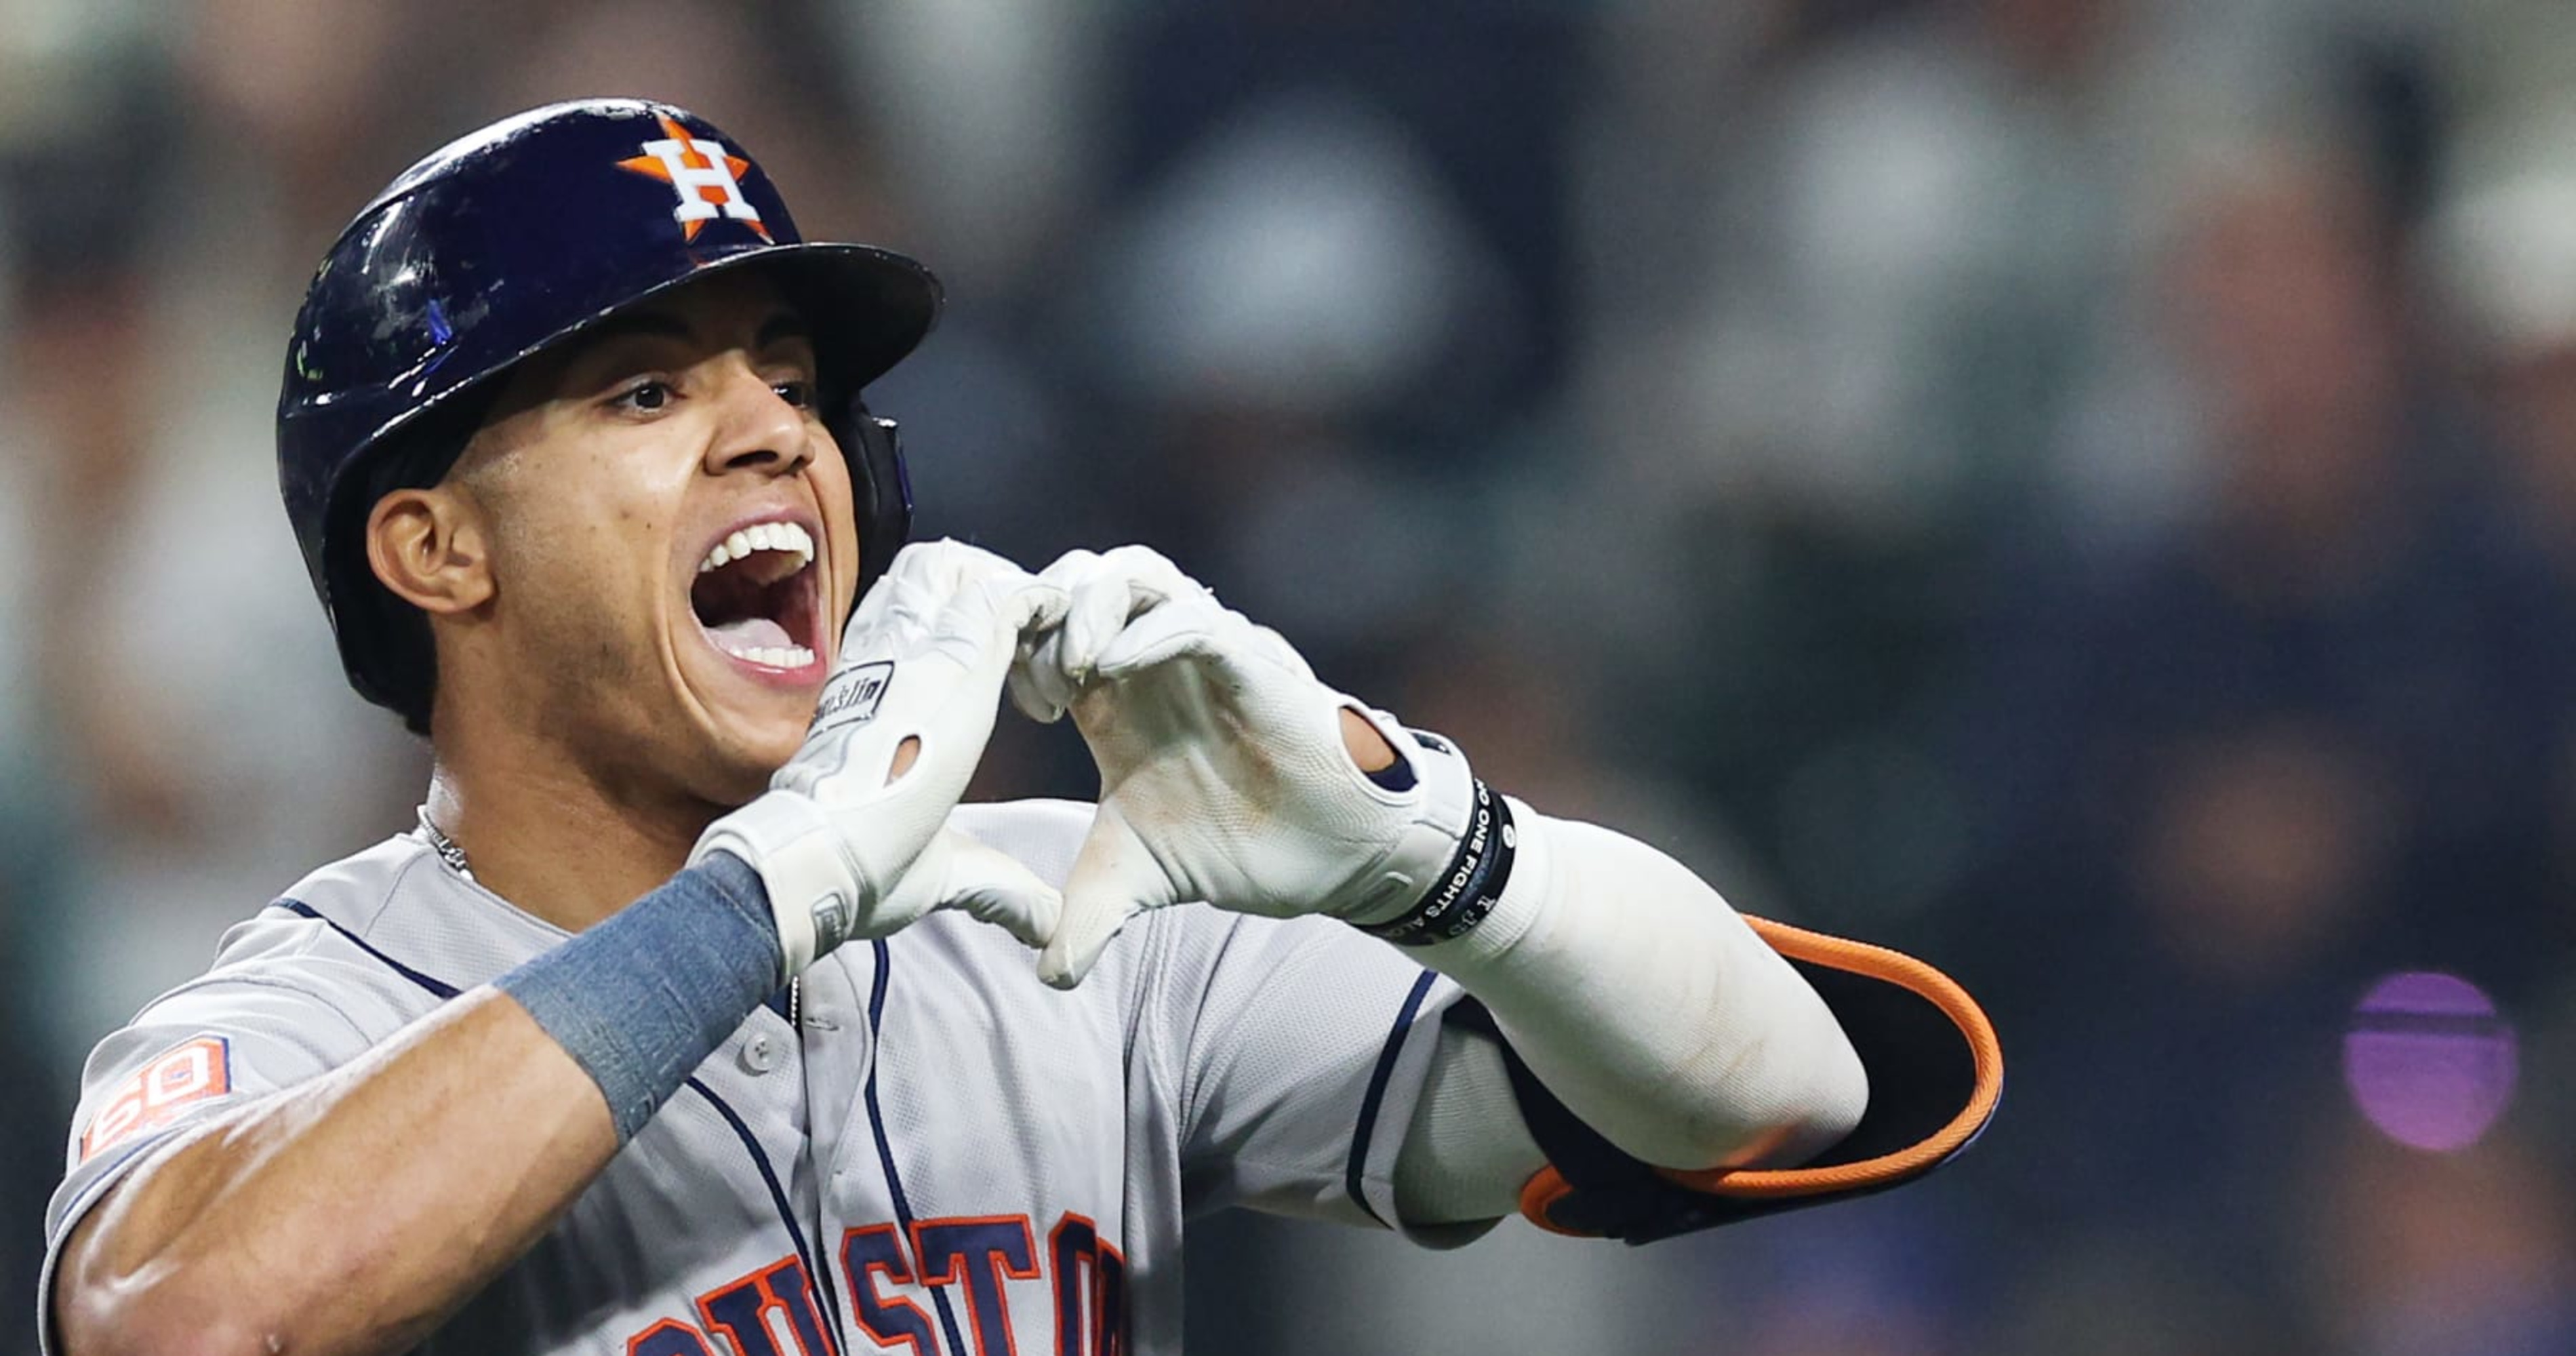 Astros' Jeremy Peña Touted as Clutch After 18th-Inning HR